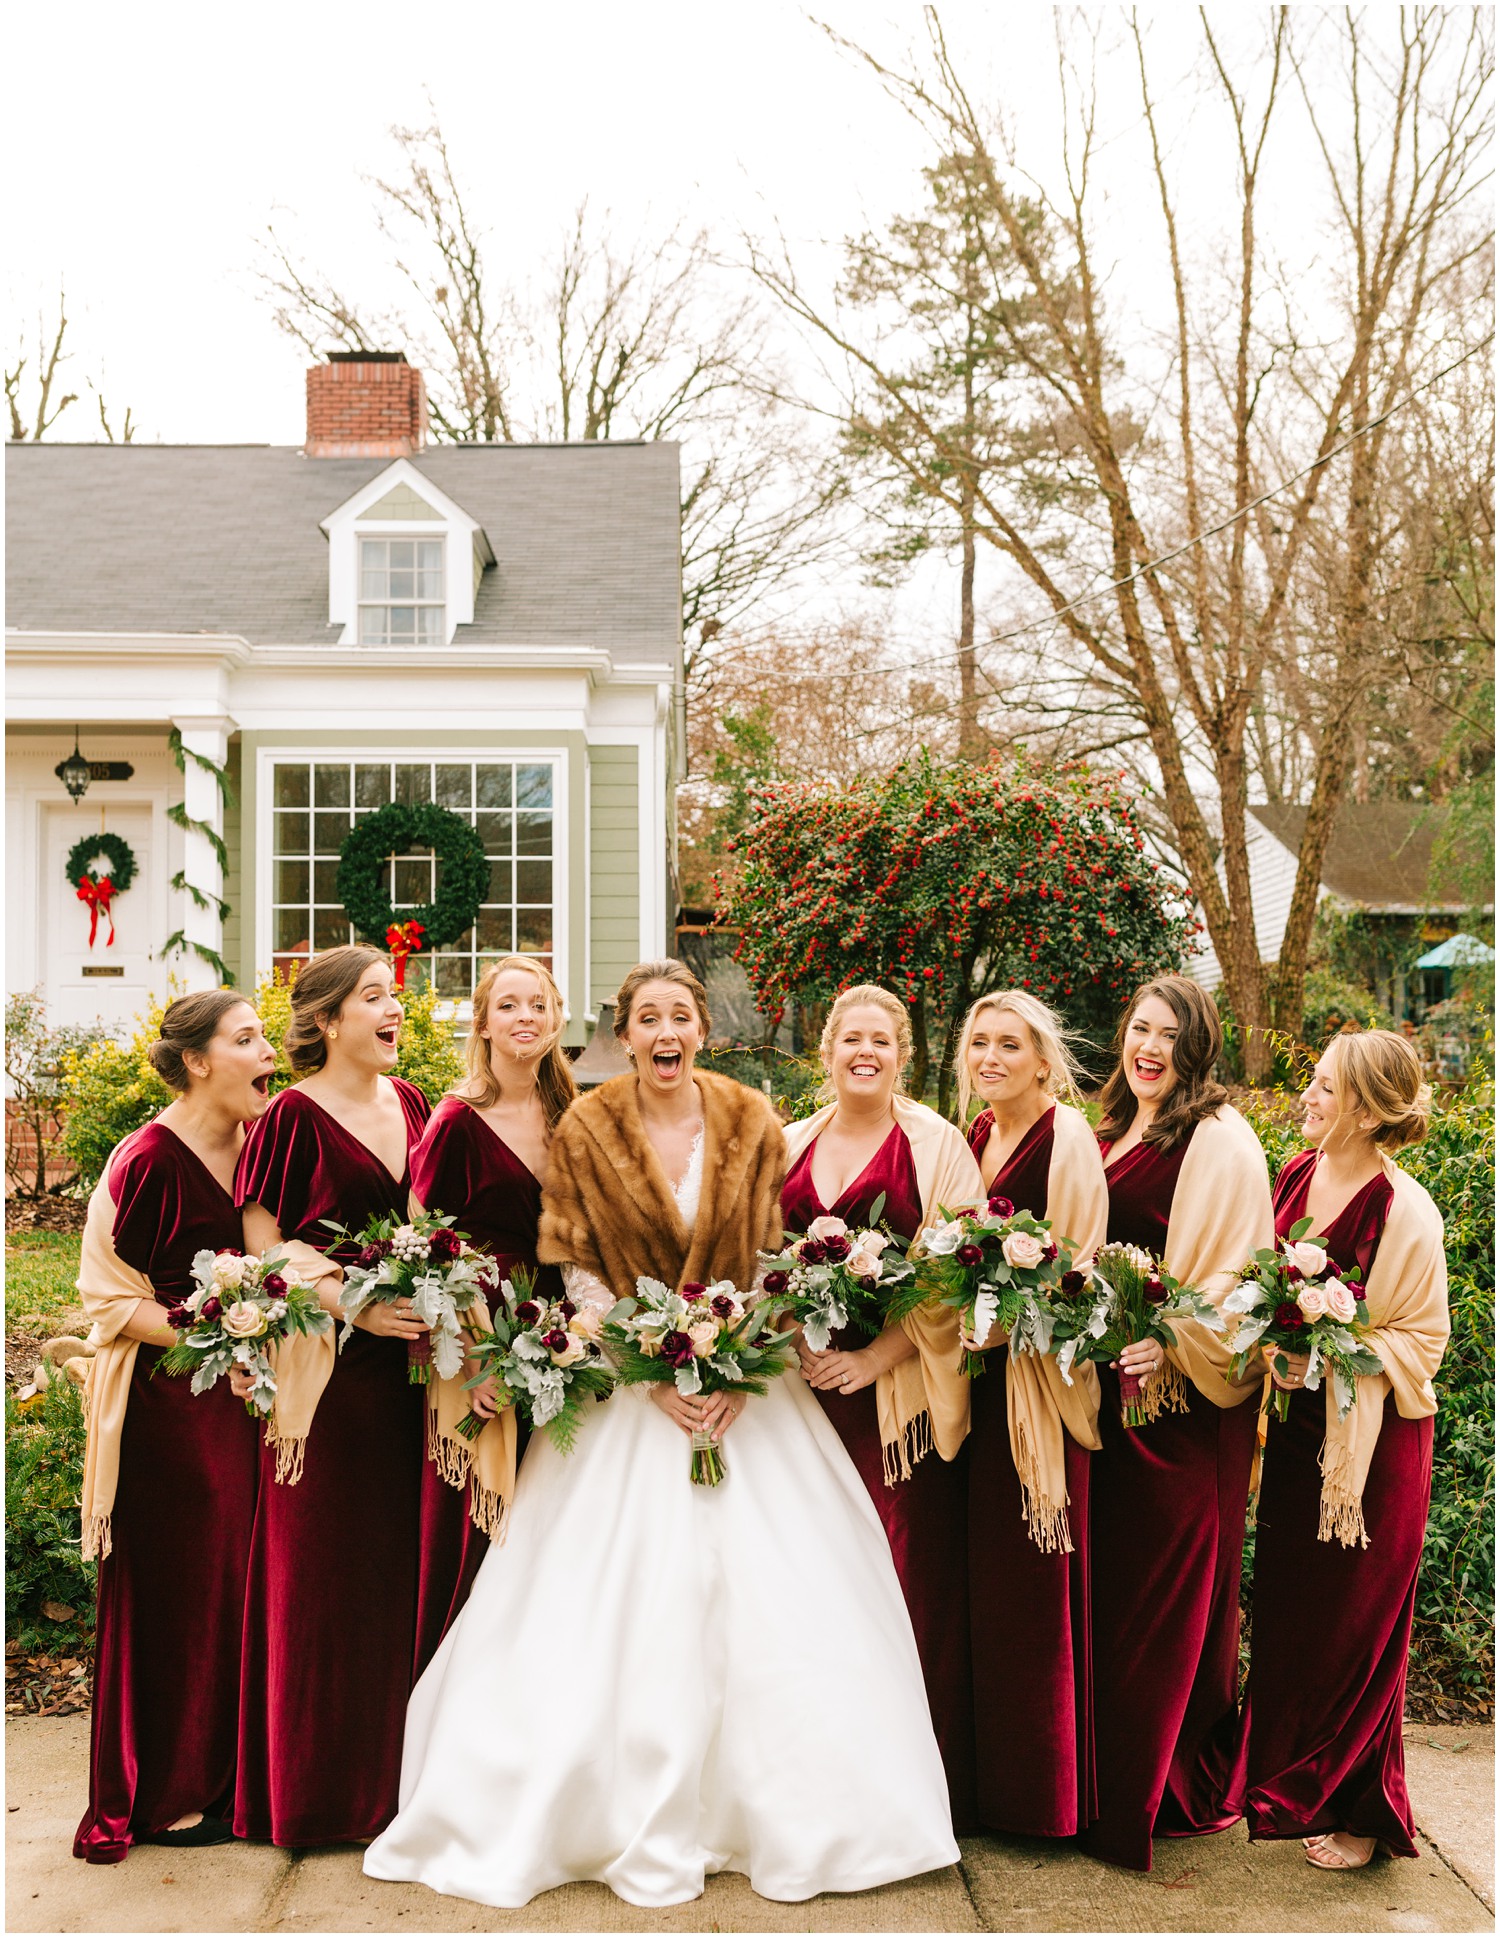 bridesmaids in burgundy velvet gowns pose with bride outside childhood home photographed by Chelsea Renay Photography